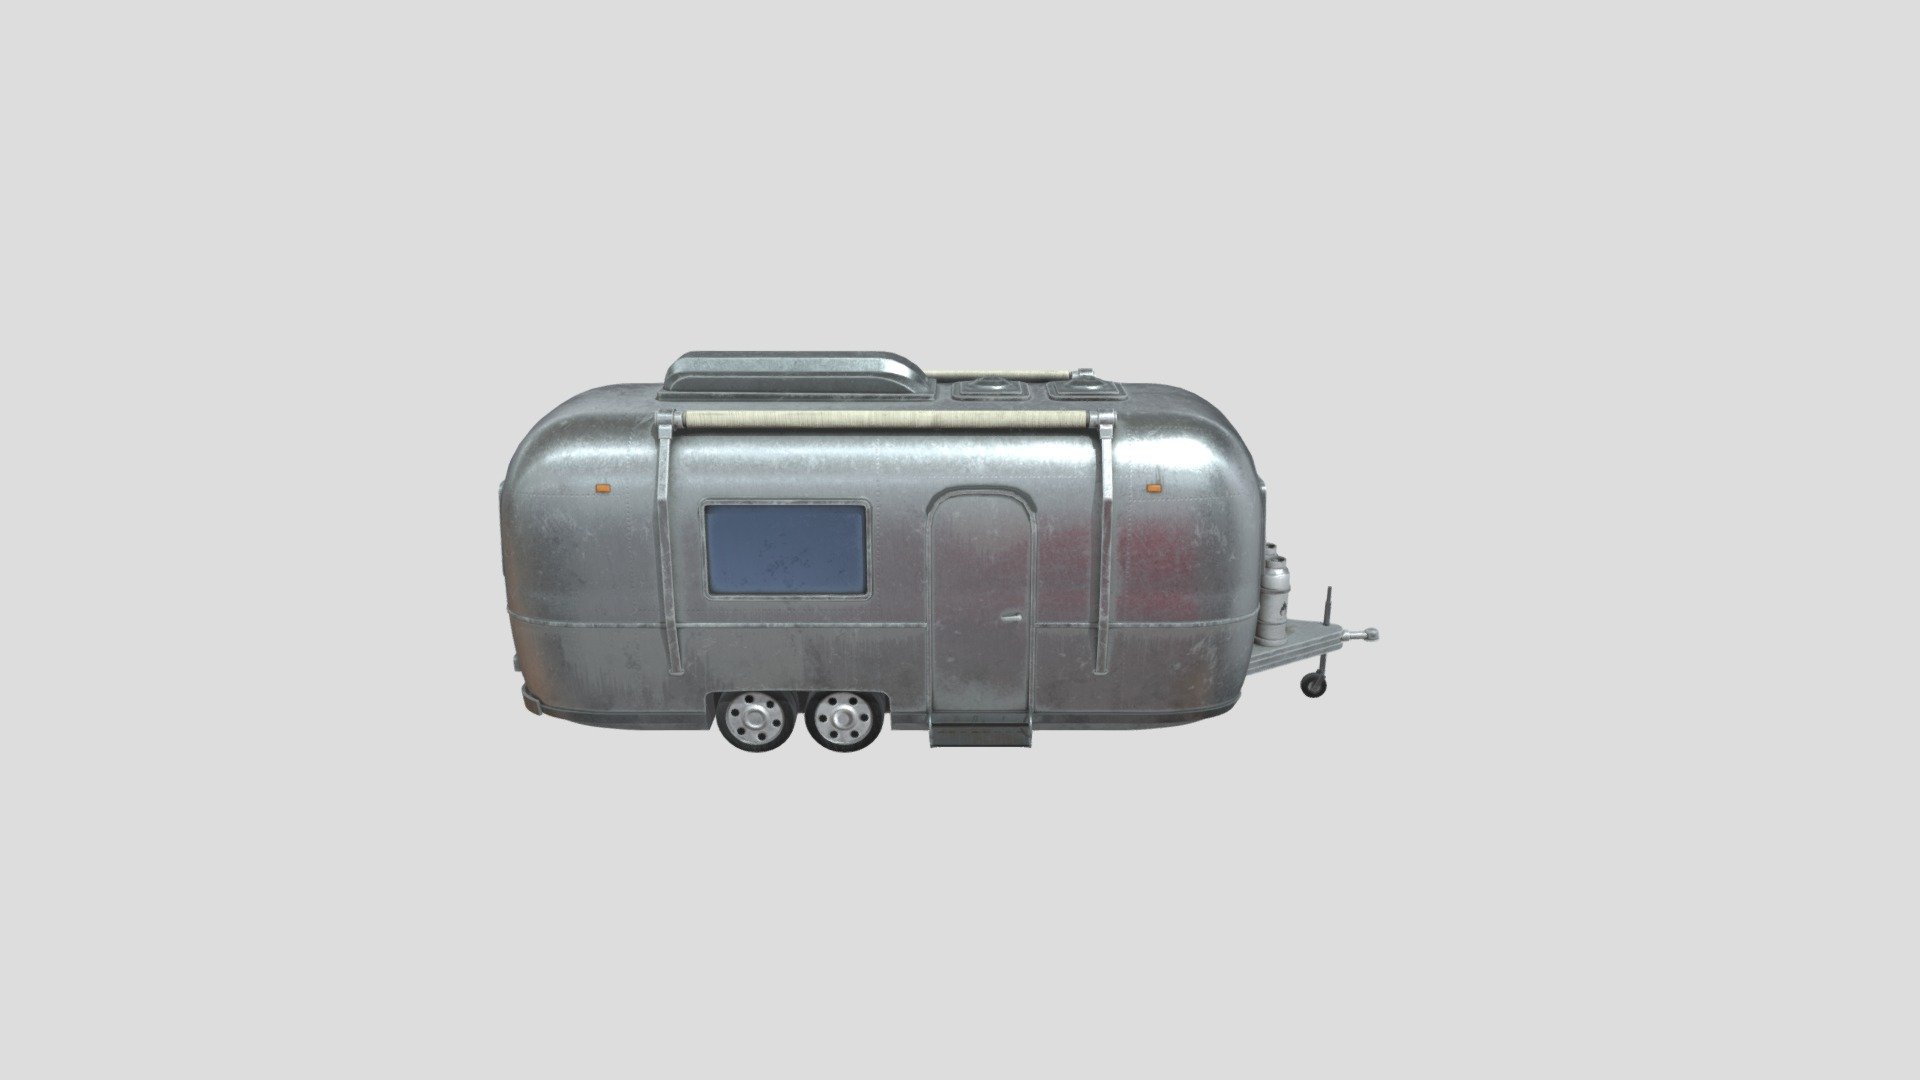 This air stream camper is medium detail perfect for mid range to long range shots. The textures do most of the work. This model is relatively lowpoly and perfect for any production. The included textures are 4k and UV unwrapped for future texturing 3d model